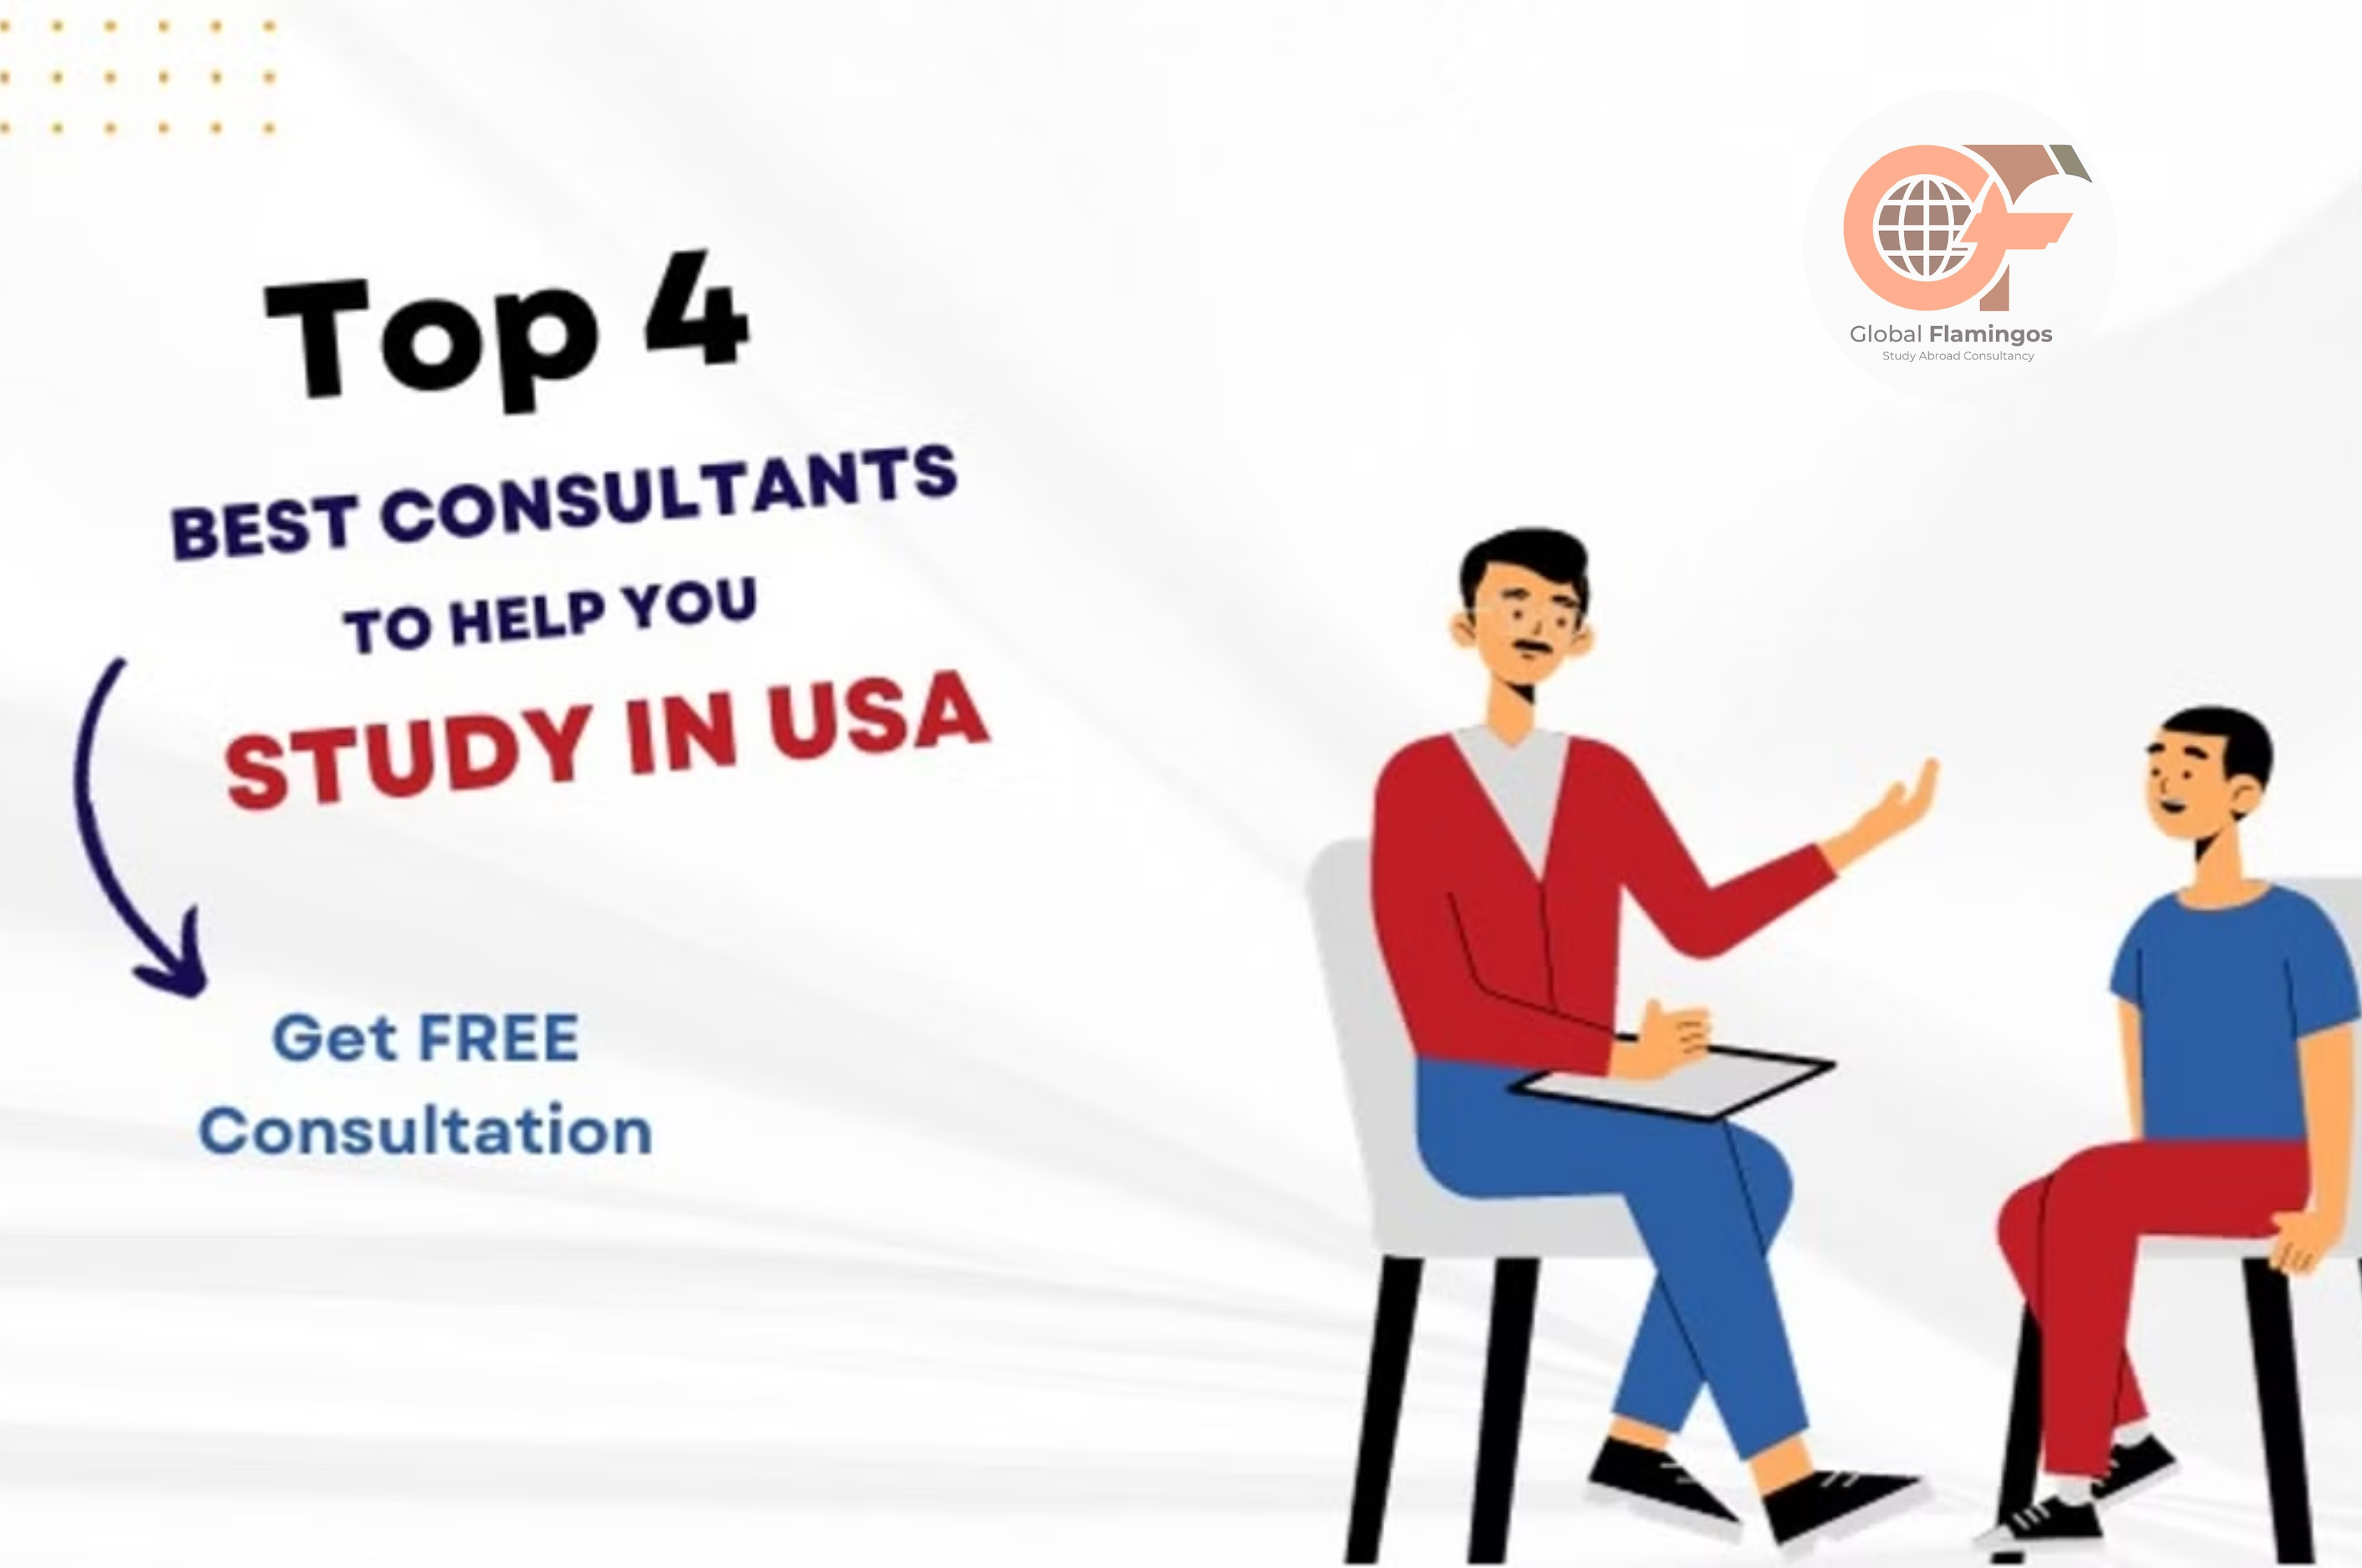 Consultancy Unlocks: Easy Scholarships & Aid for Studying Abroad